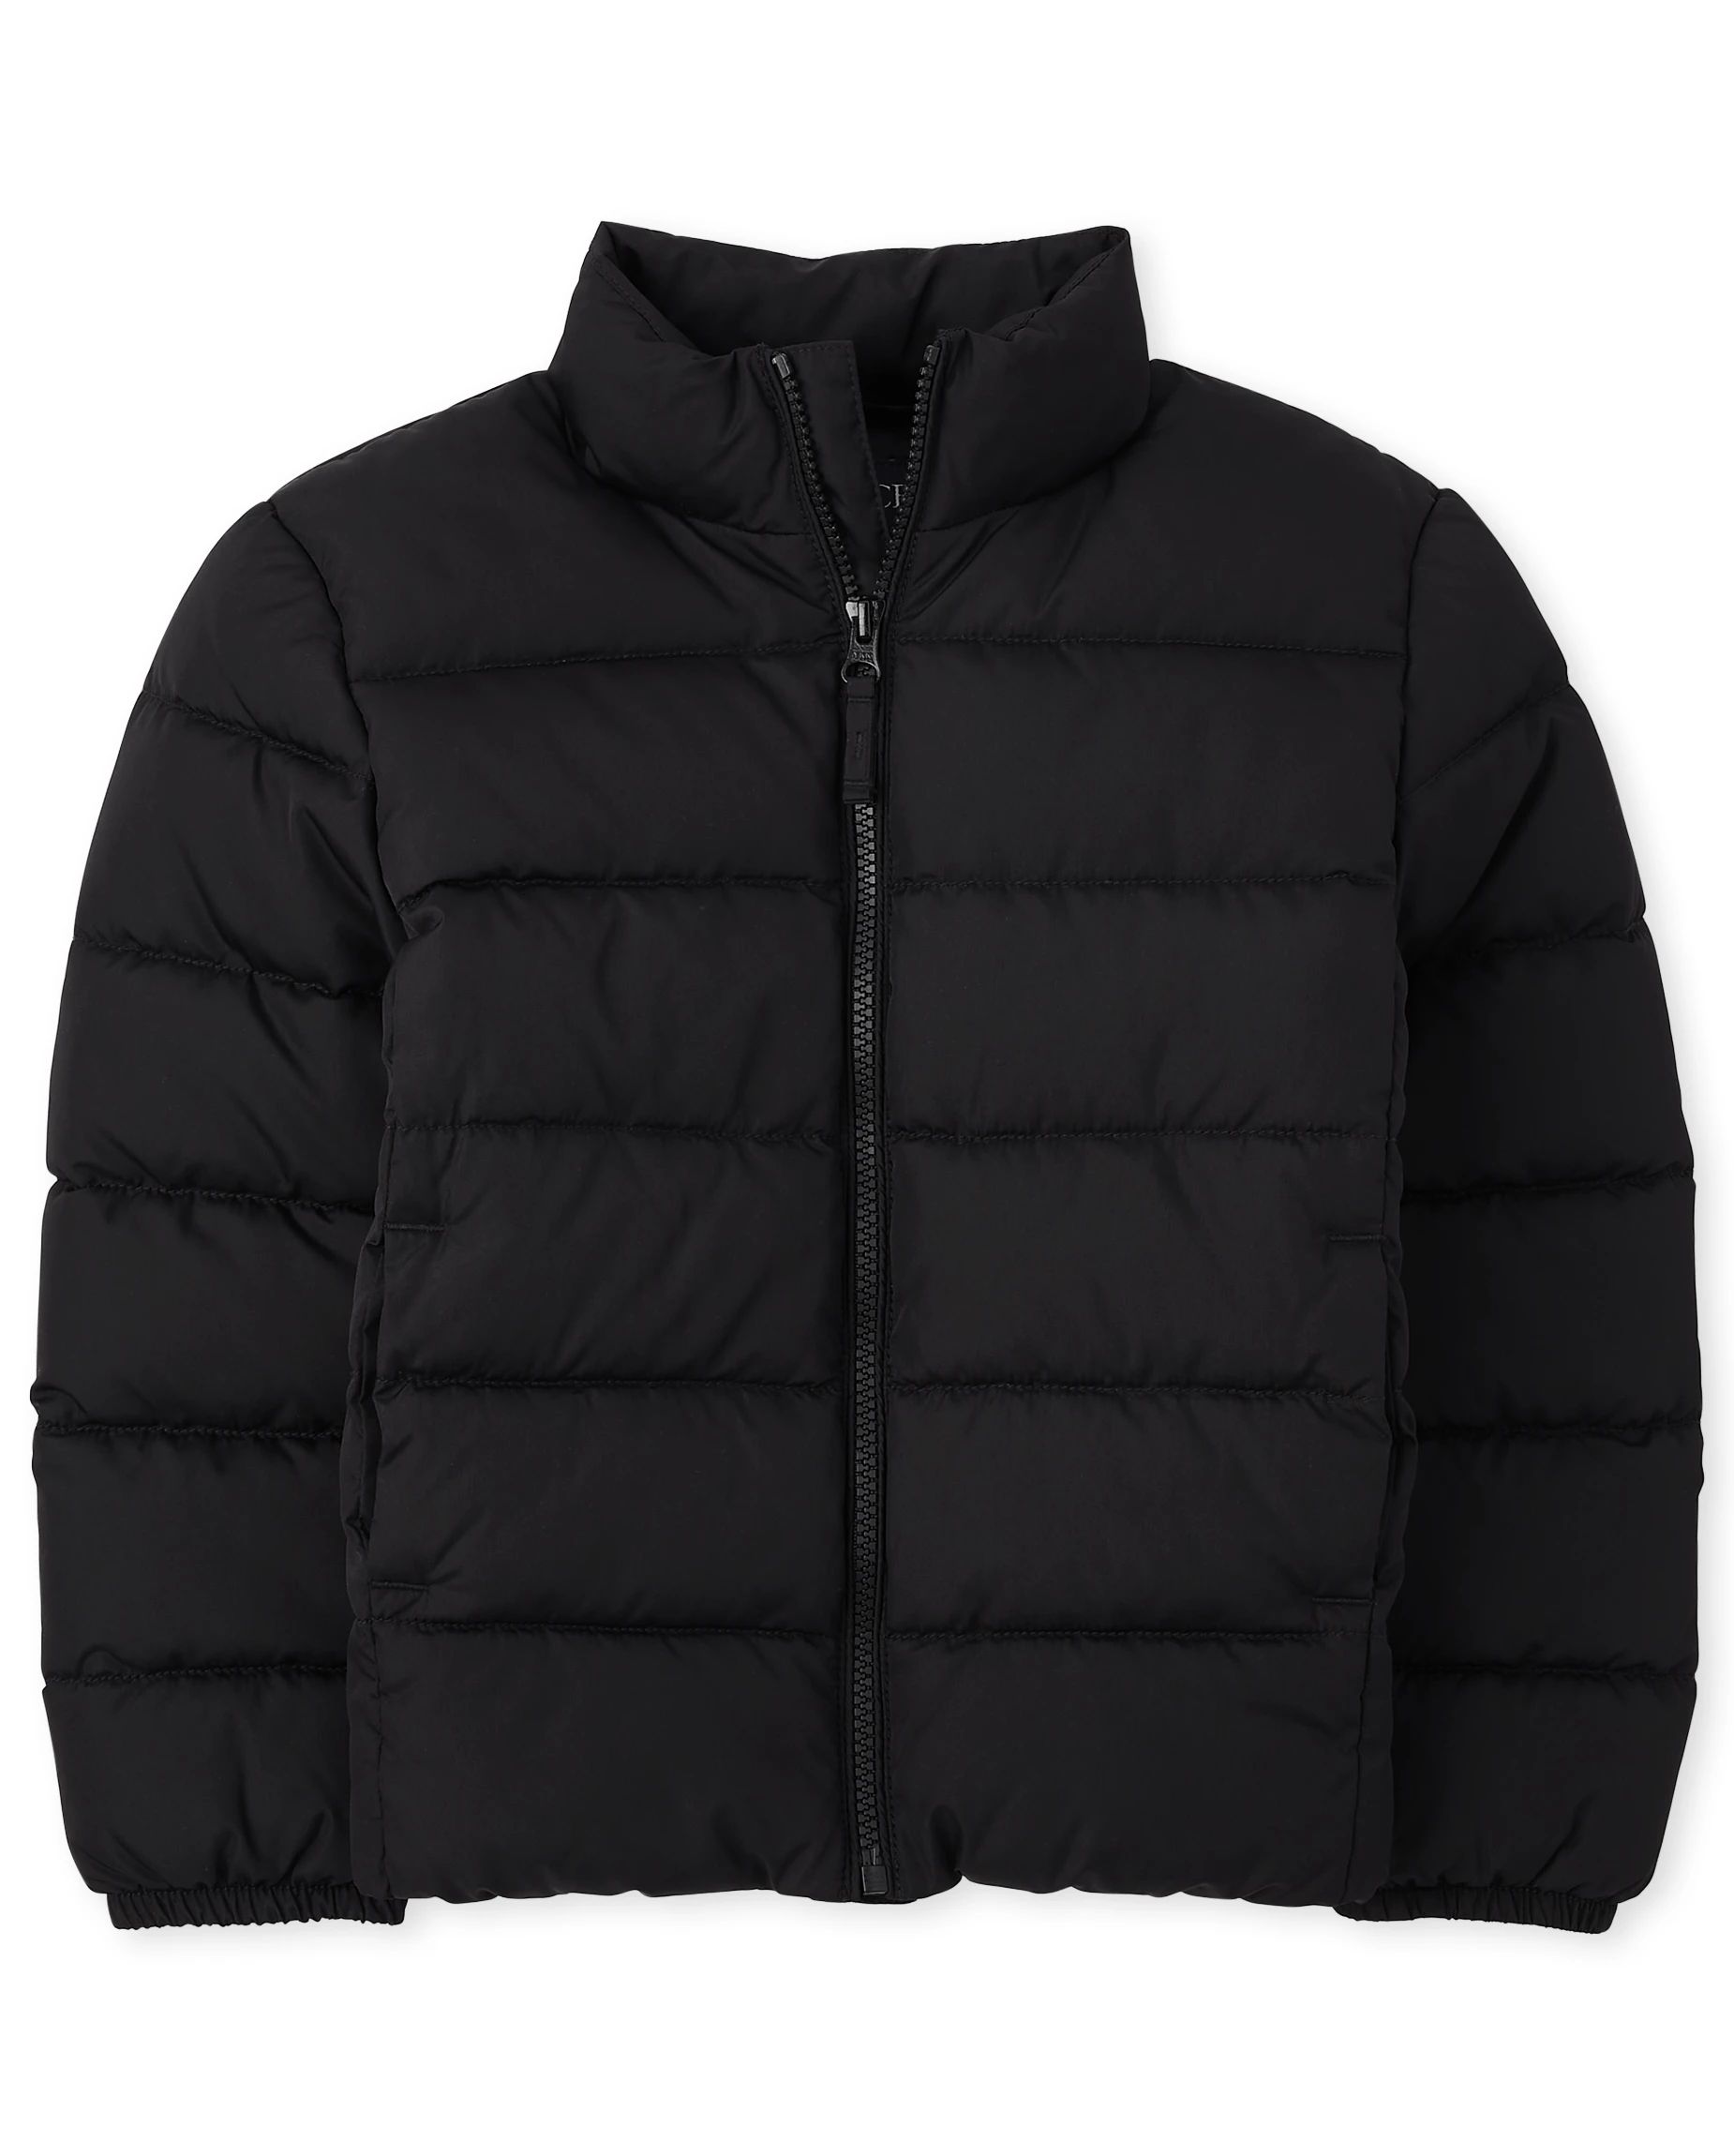 Boys Long Sleeve Puffer Jacket | The Children's Place  - BLACK | The Children's Place